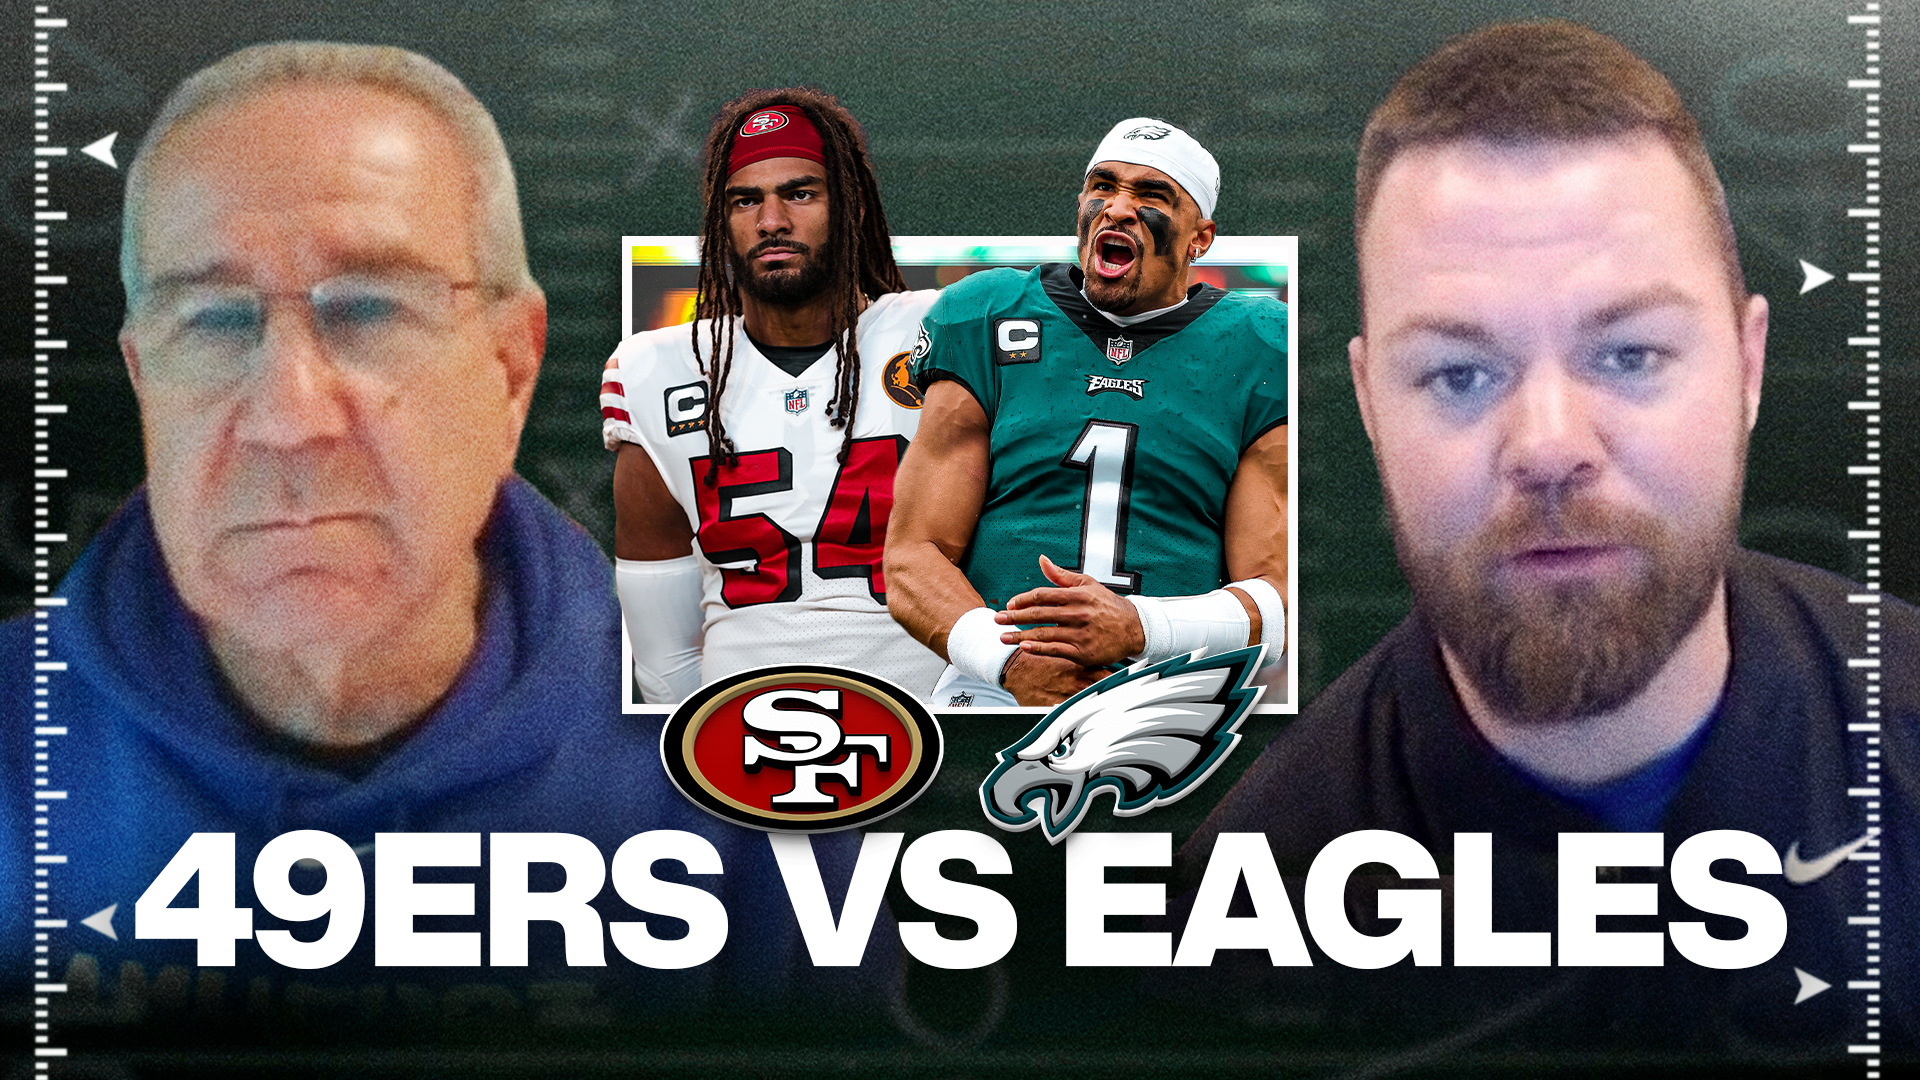 Eagles vs. 49ers preview